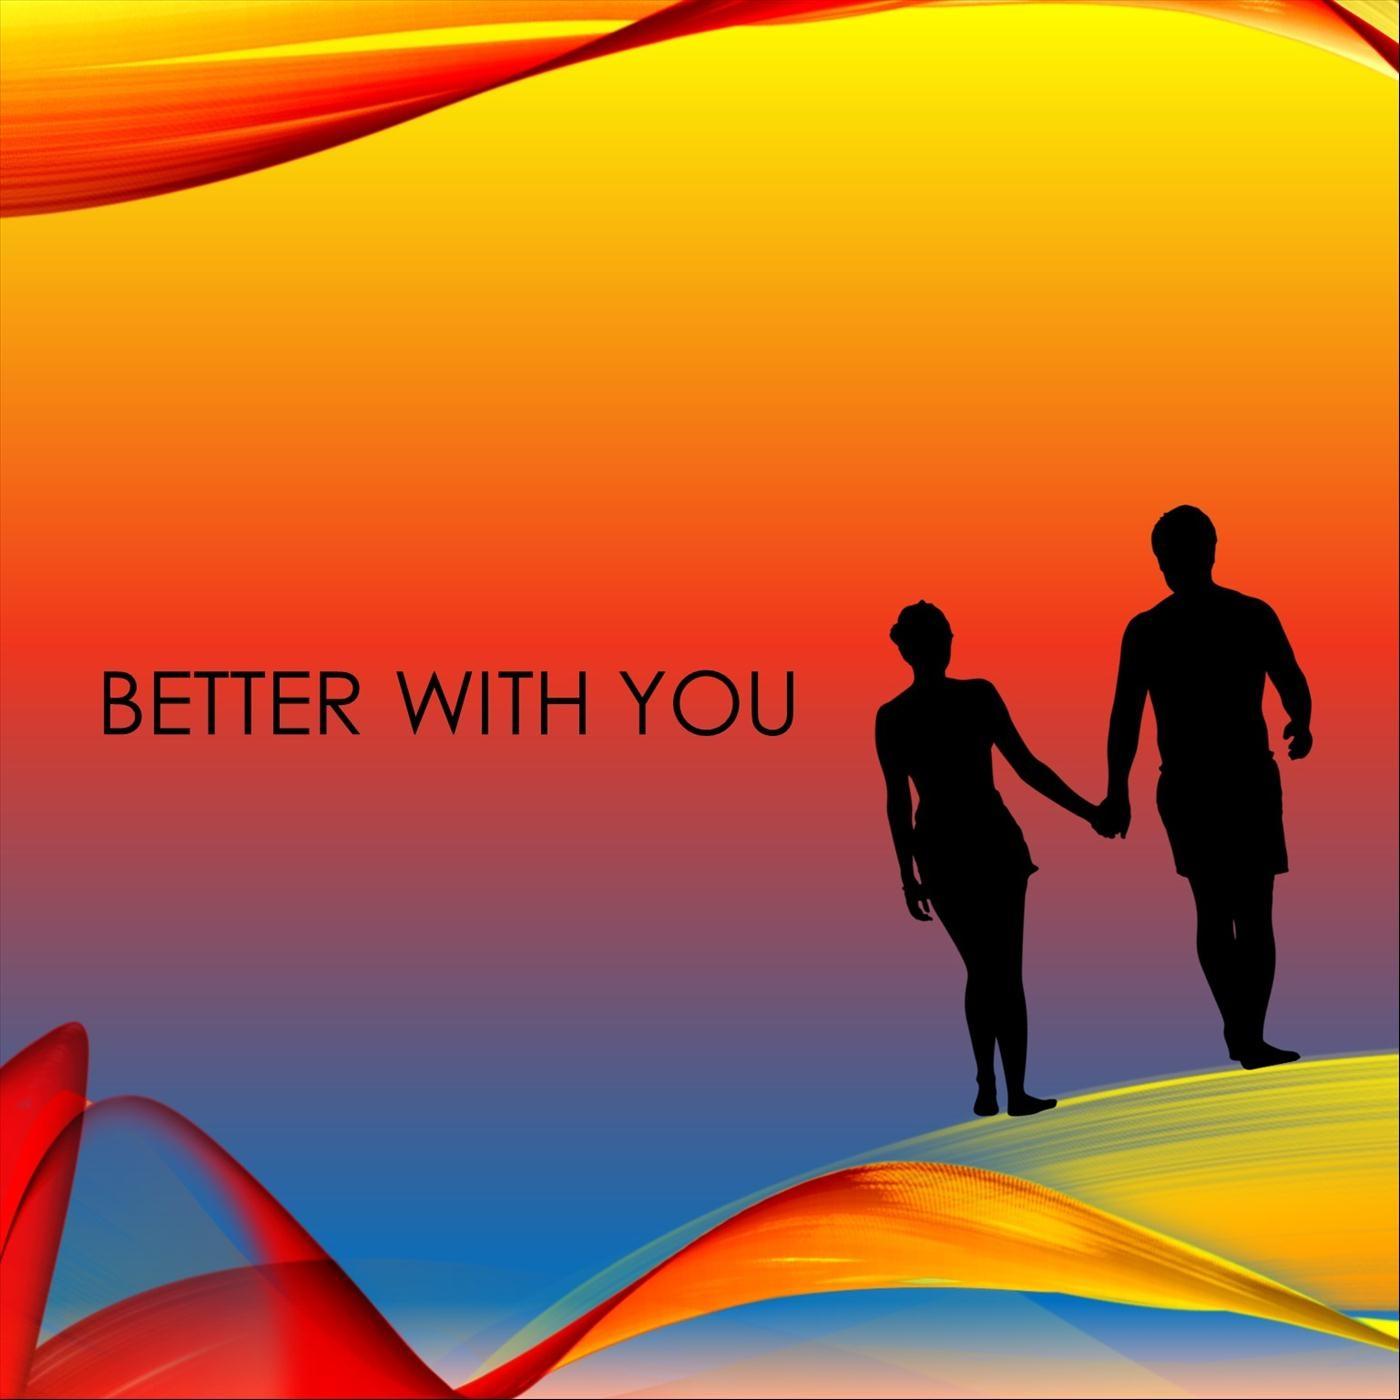 Better with You